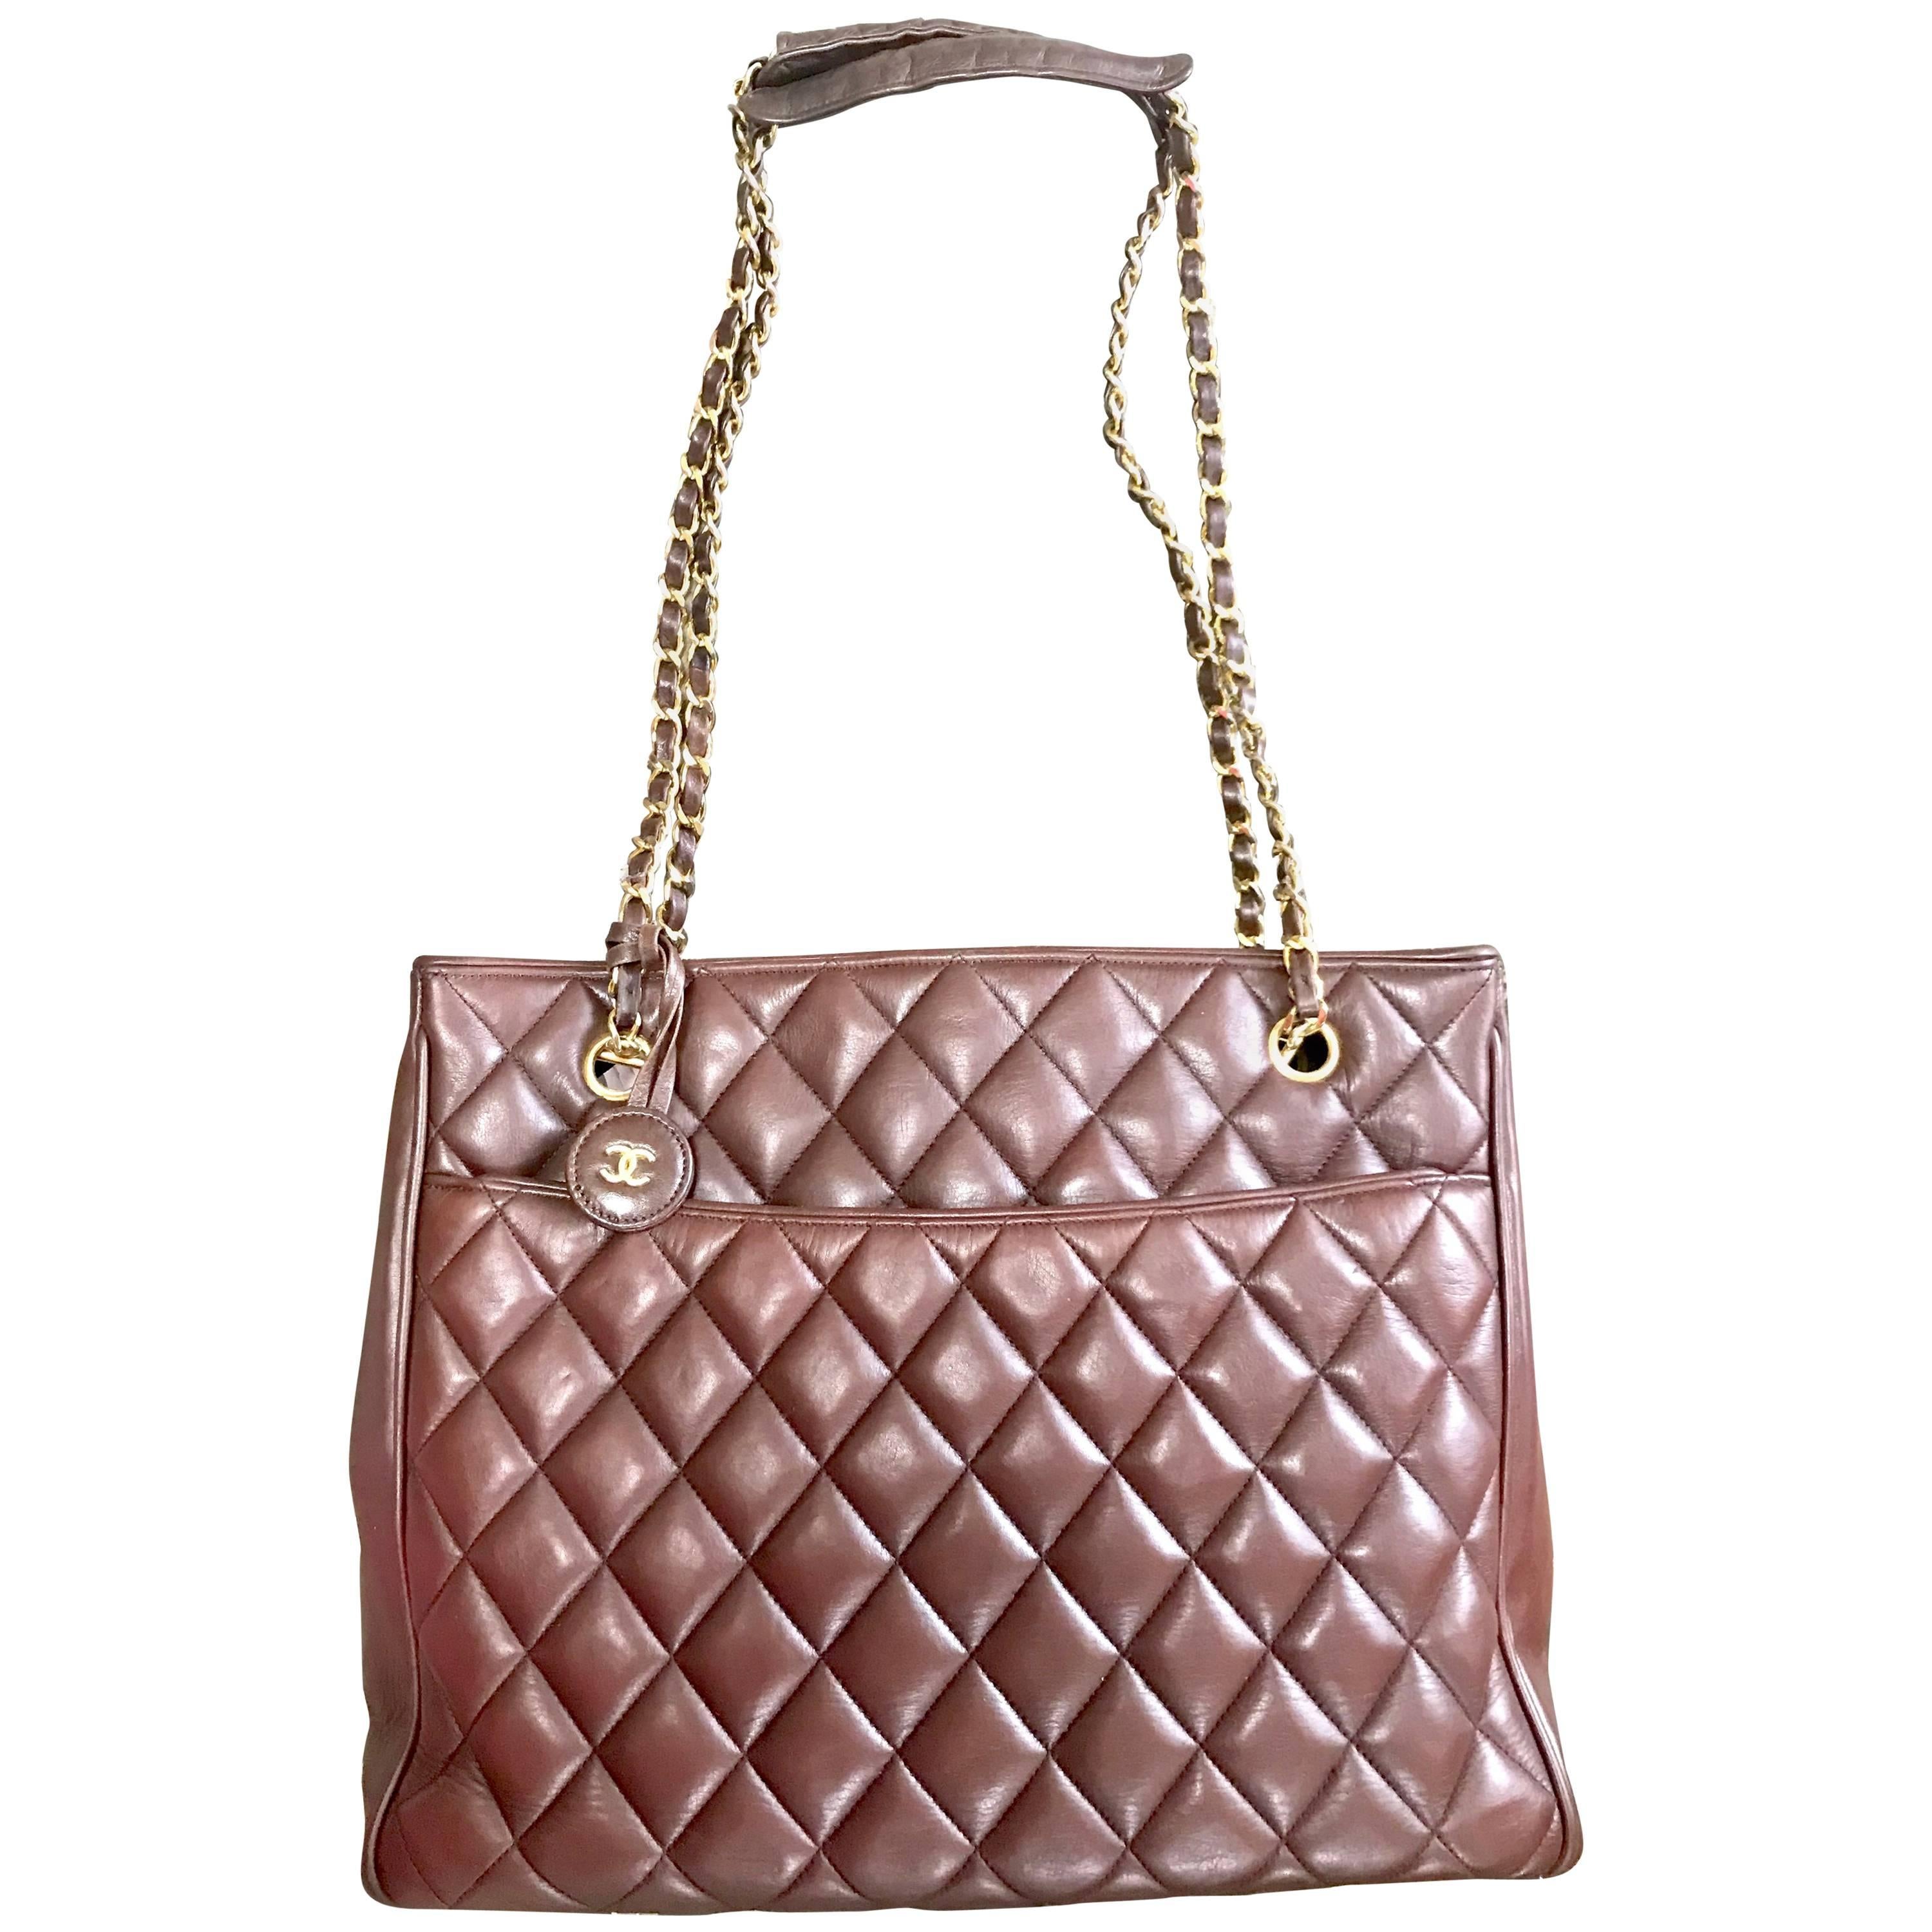 Vintage CHANEL brown quilted lamb leather classic tote bag with golden chains. For Sale